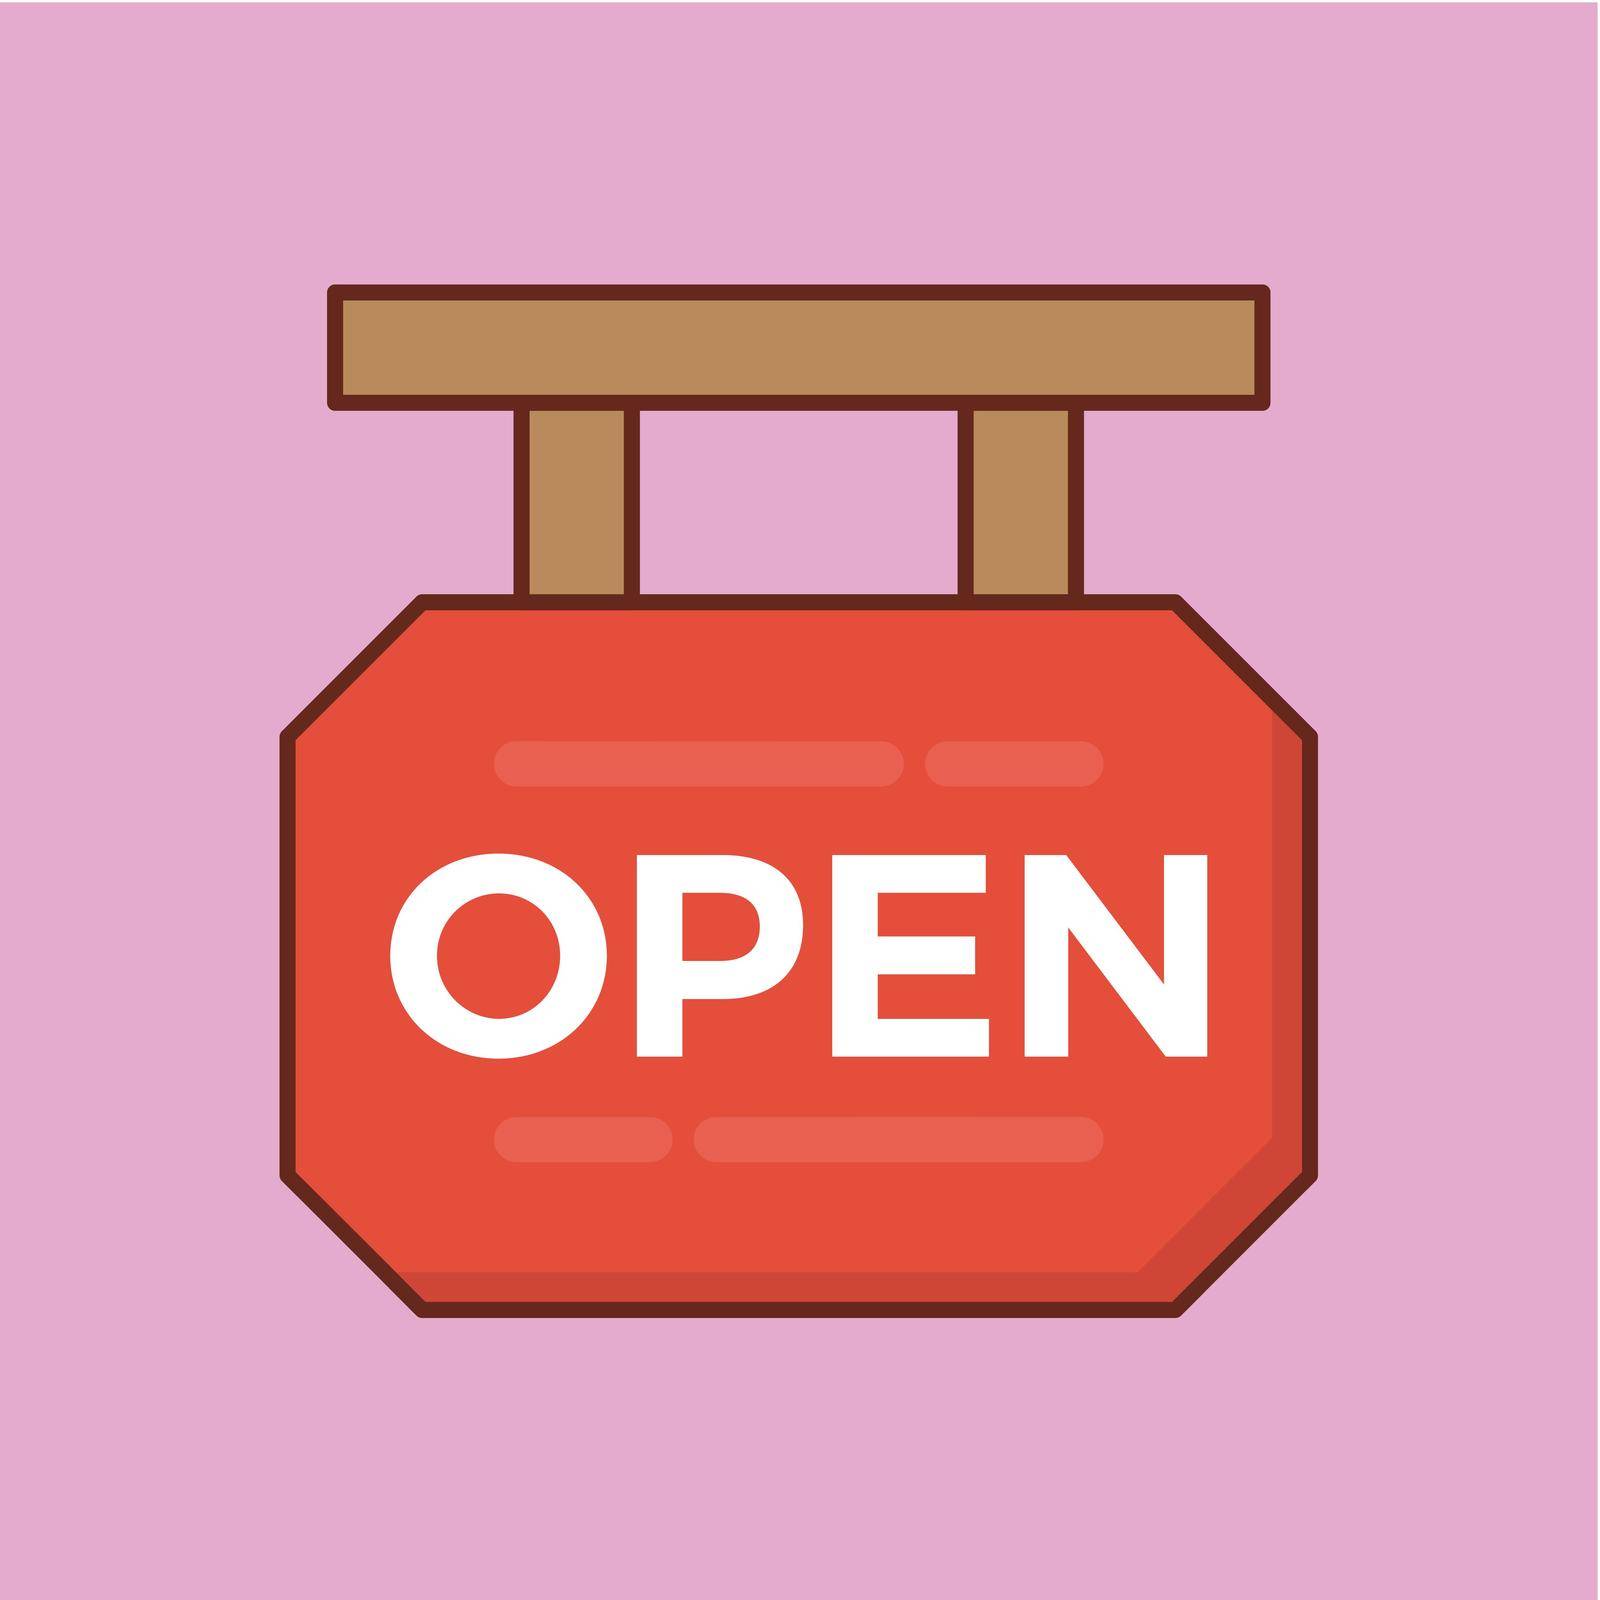 open by FlaticonsDesign